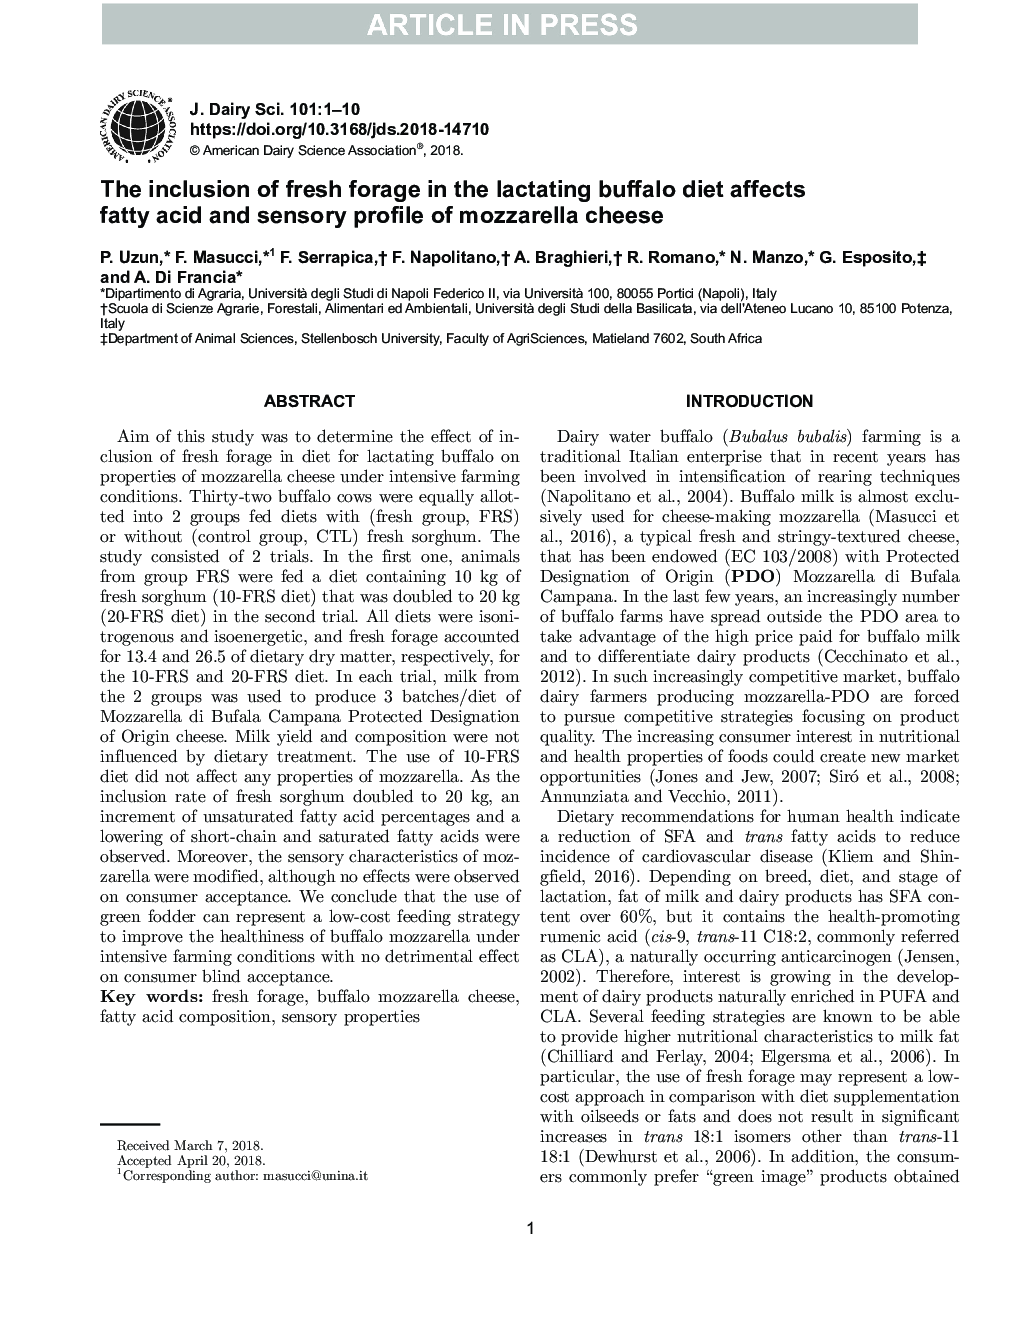 The inclusion of fresh forage in the lactating buffalo diet affects fatty acid and sensory profile of mozzarella cheese